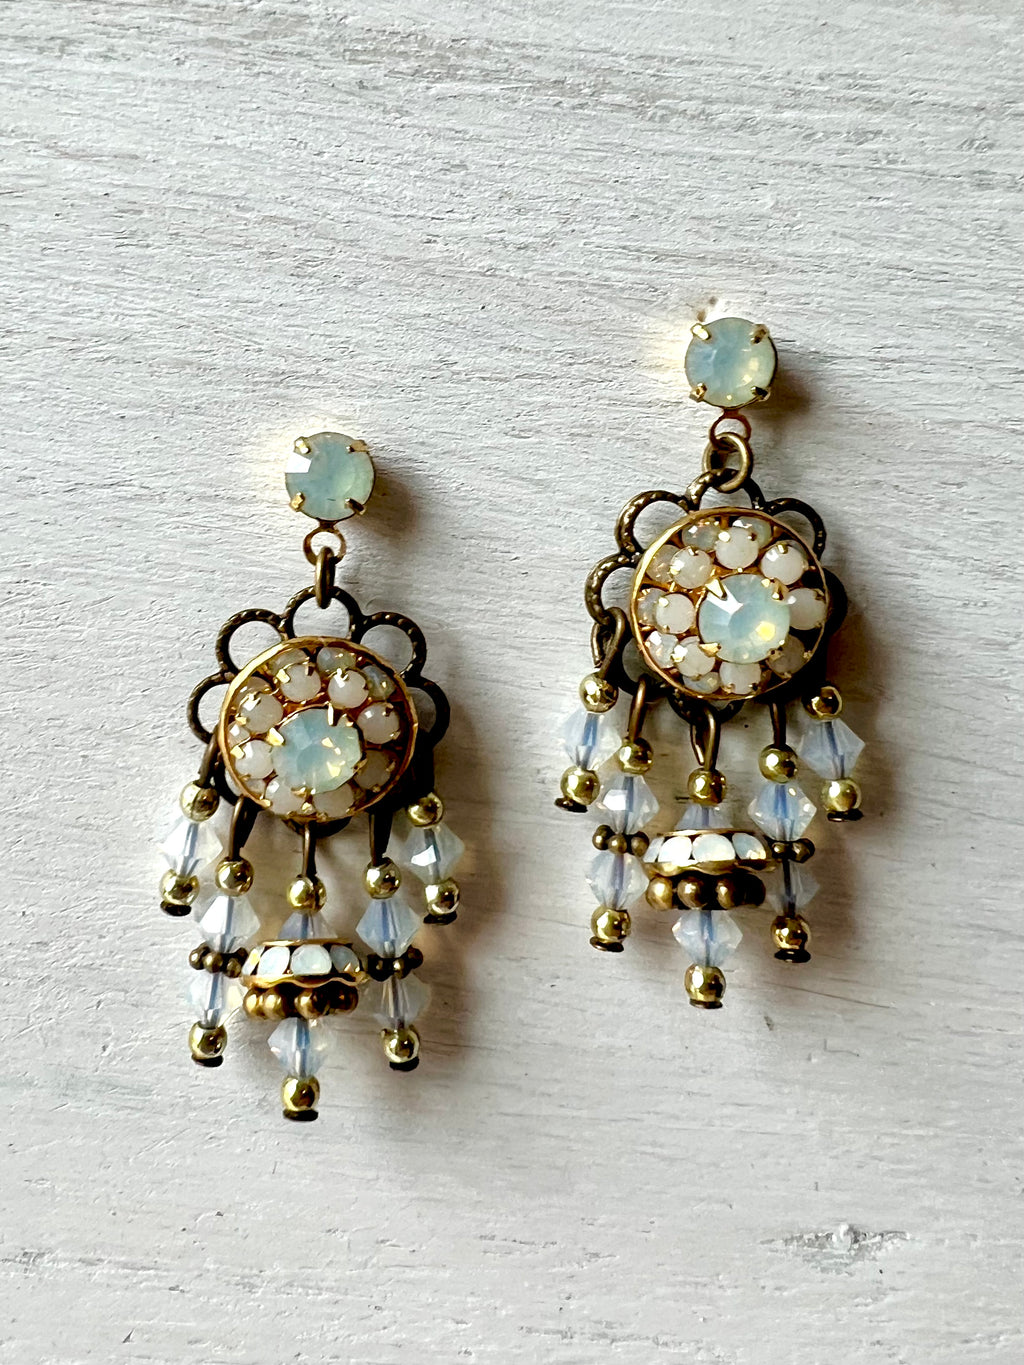 RGS-E080: Handcrafted Crystal Earrings